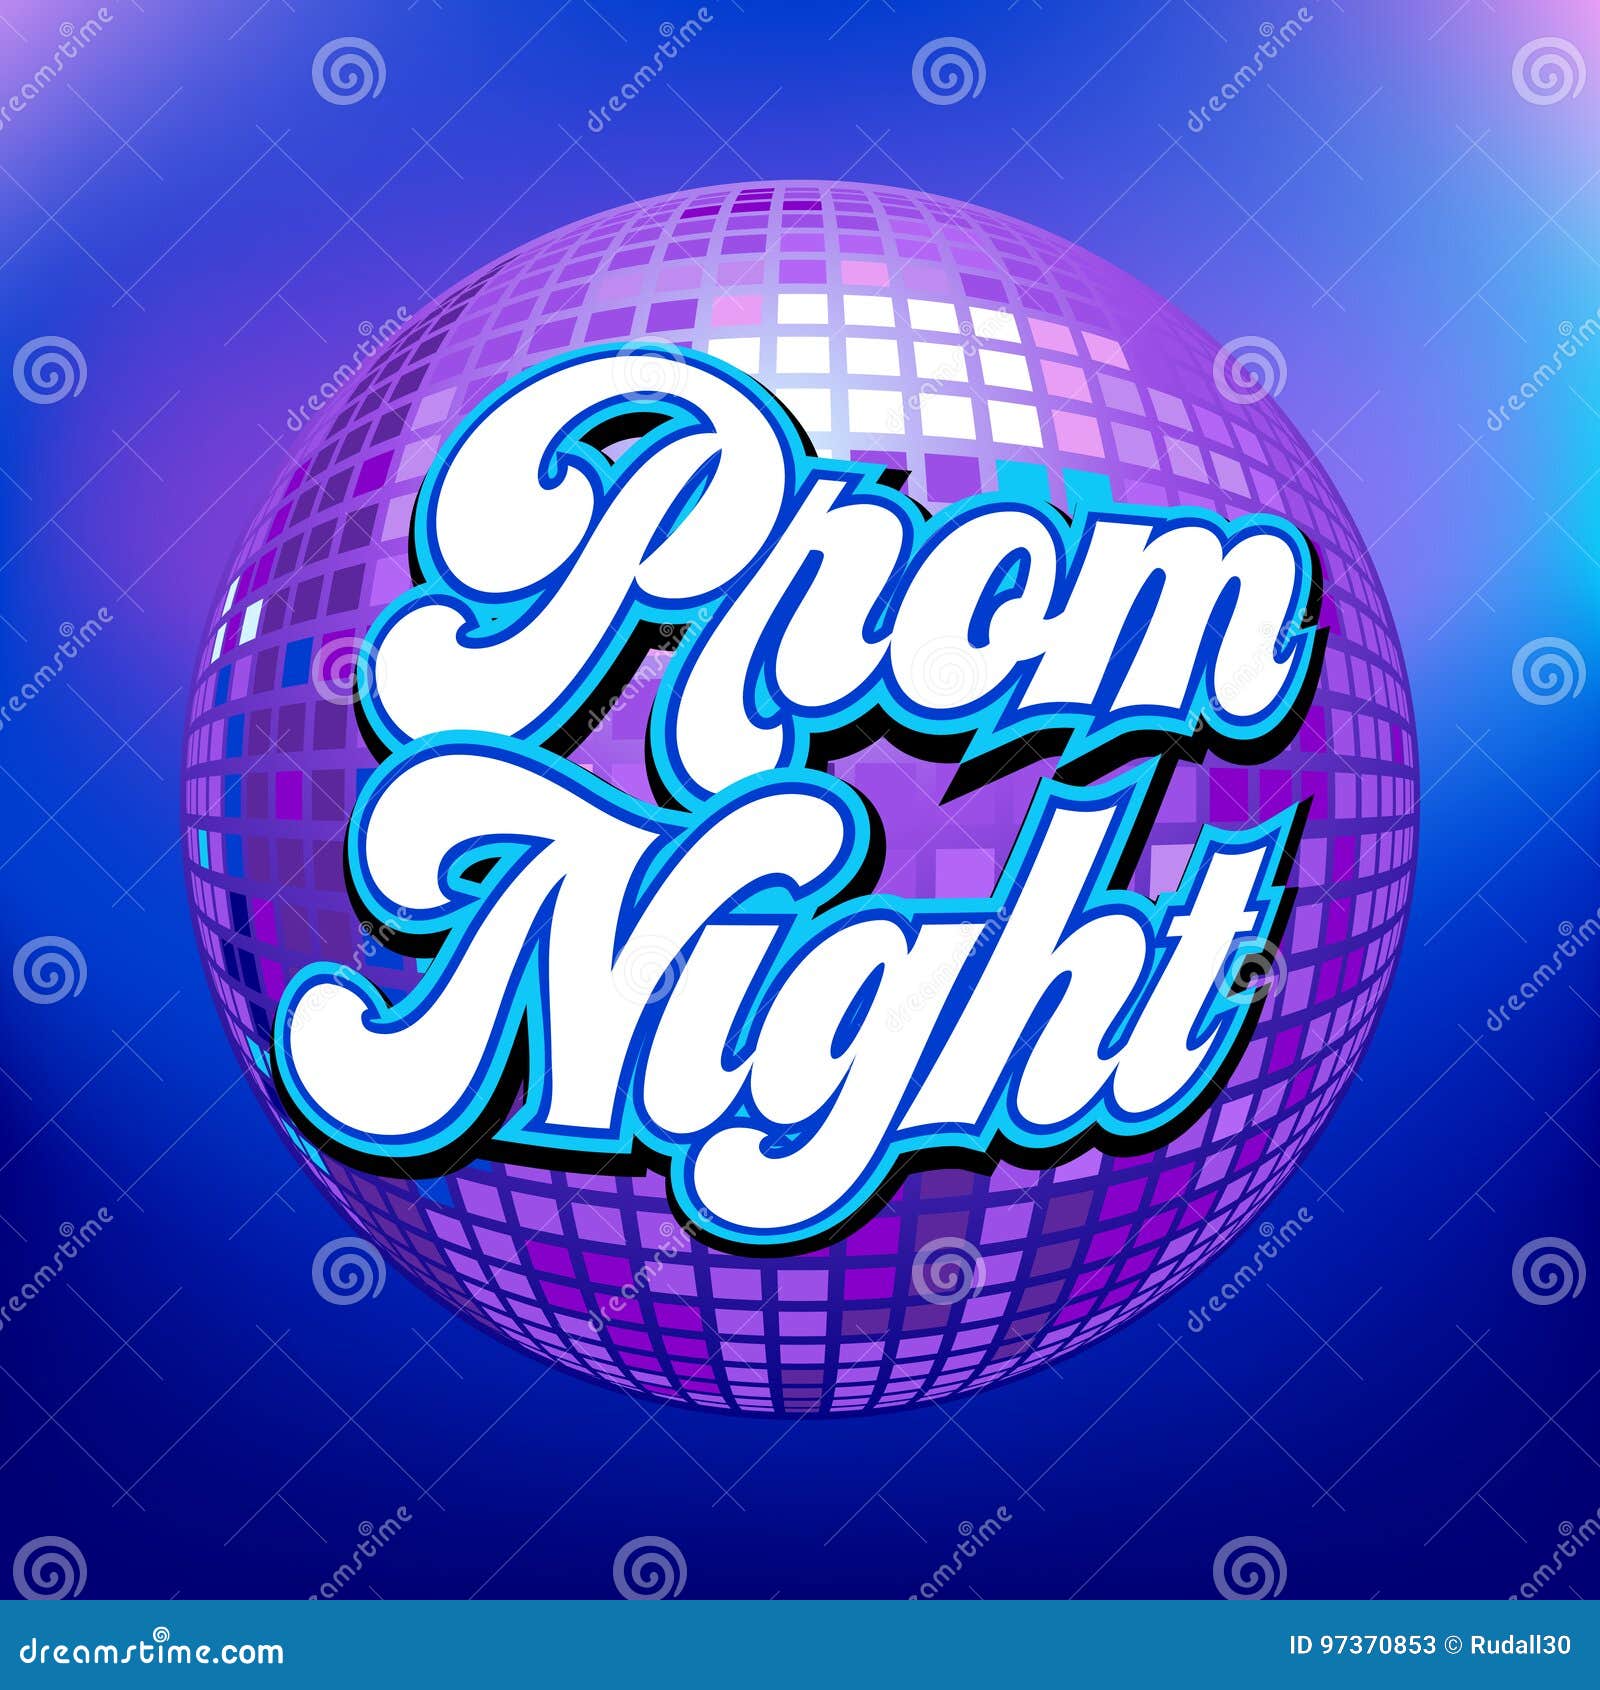 prom night party